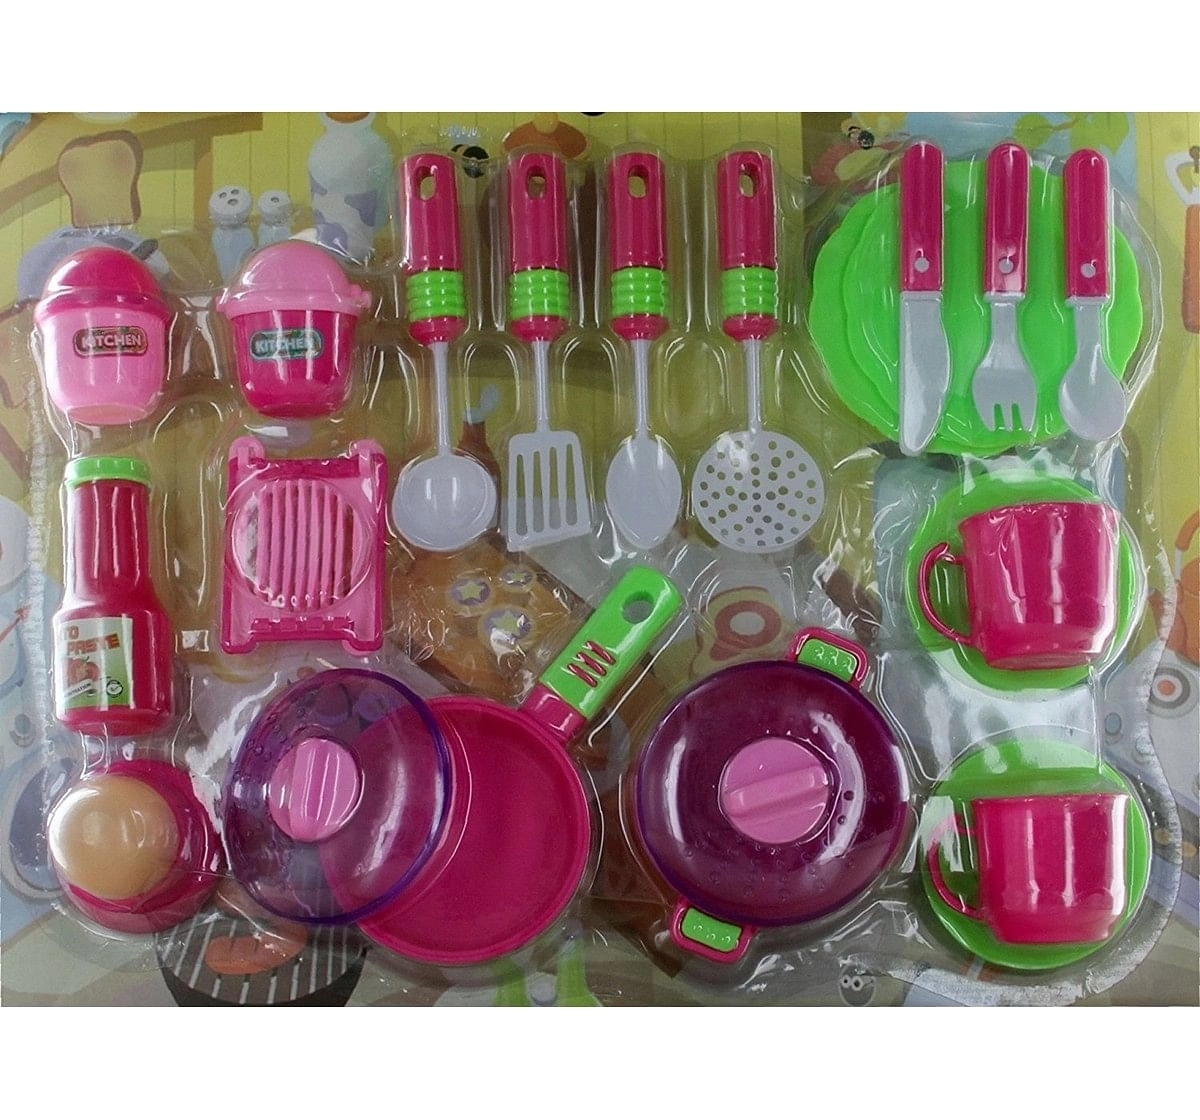 Comdaq Kitchen Set with Crockery and Cutlery for age 3Y+ 